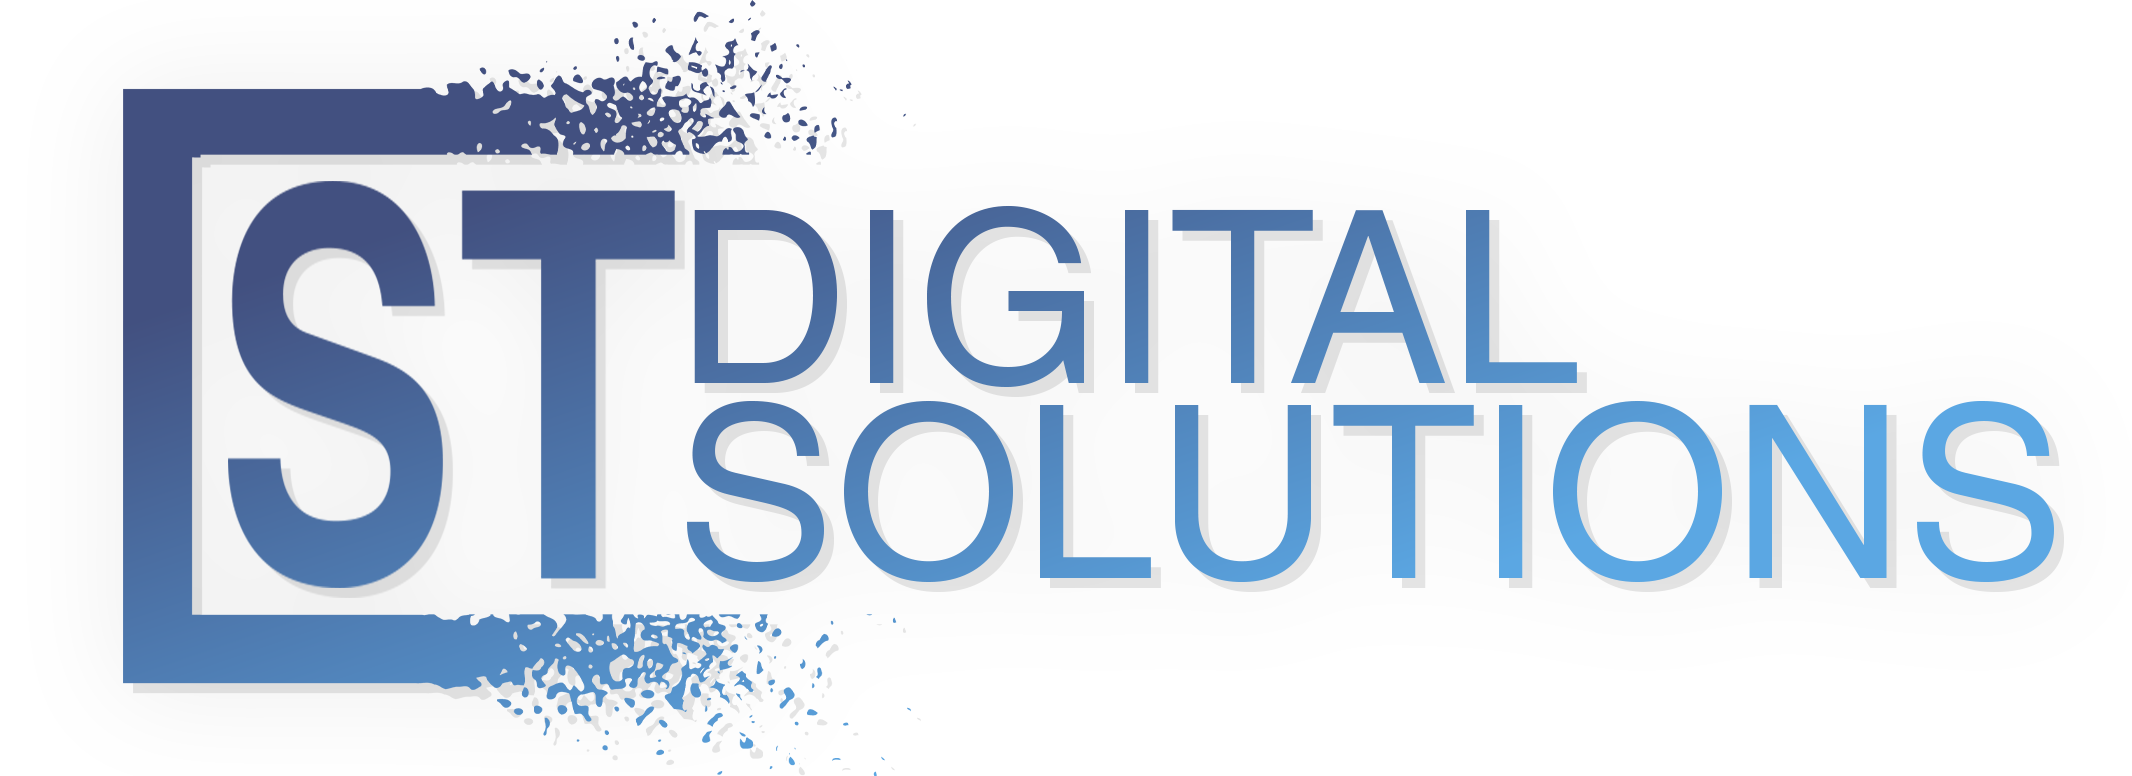 ST Digital Solutions, Chattanooga, TN, Reno NV, Indianapolis, IN, Bloomington, IN and Ft. Wayne, IN